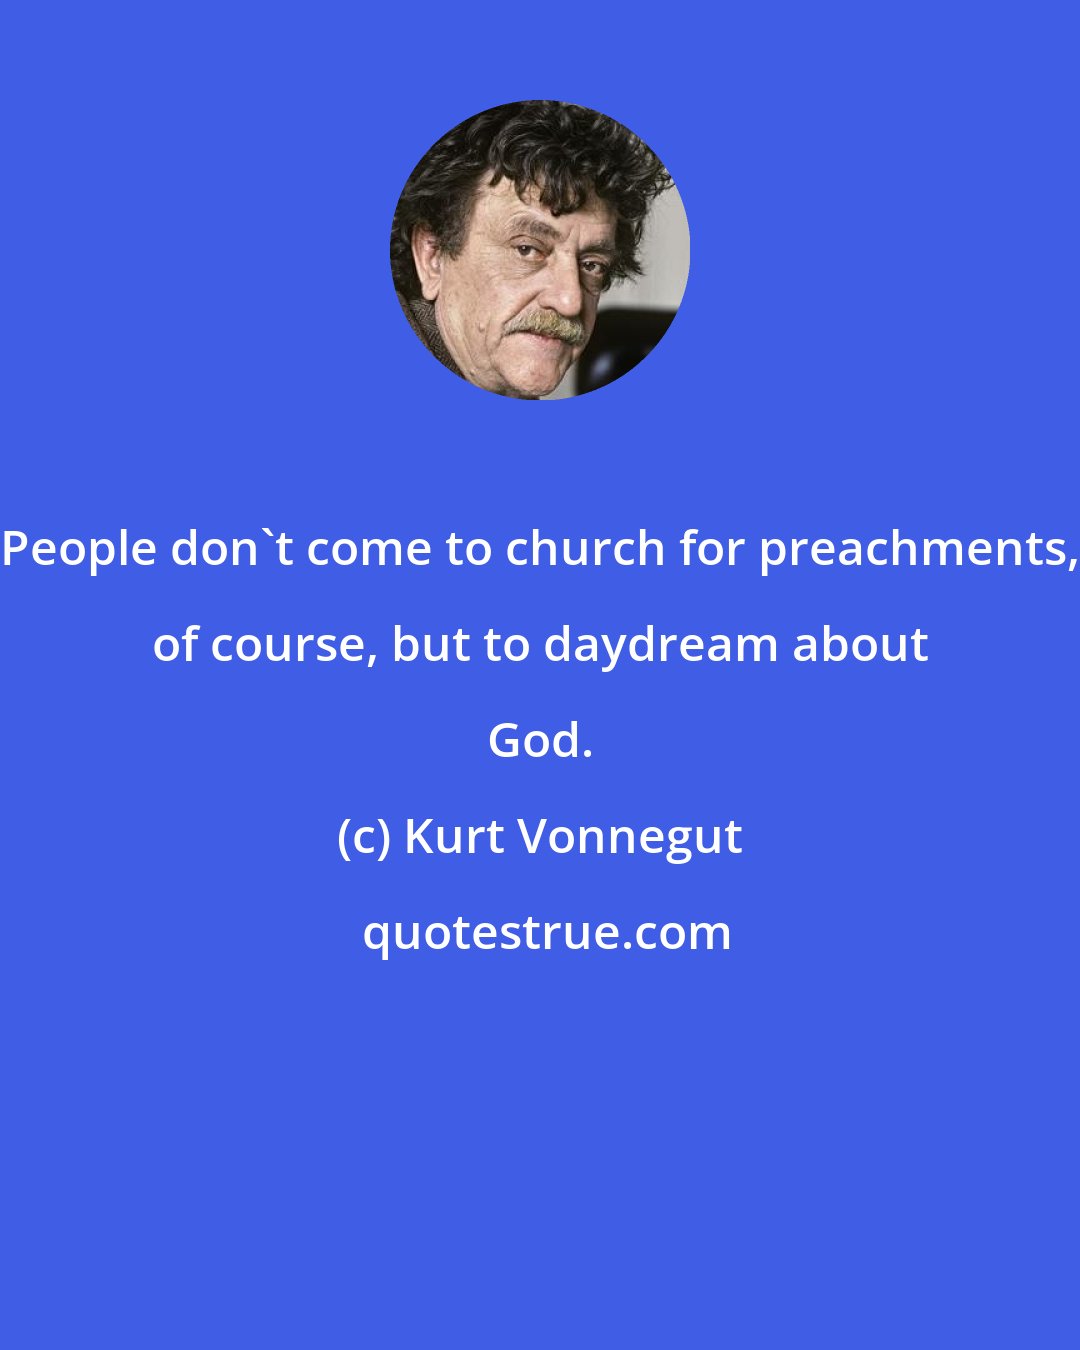 Kurt Vonnegut: People don't come to church for preachments, of course, but to daydream about God.